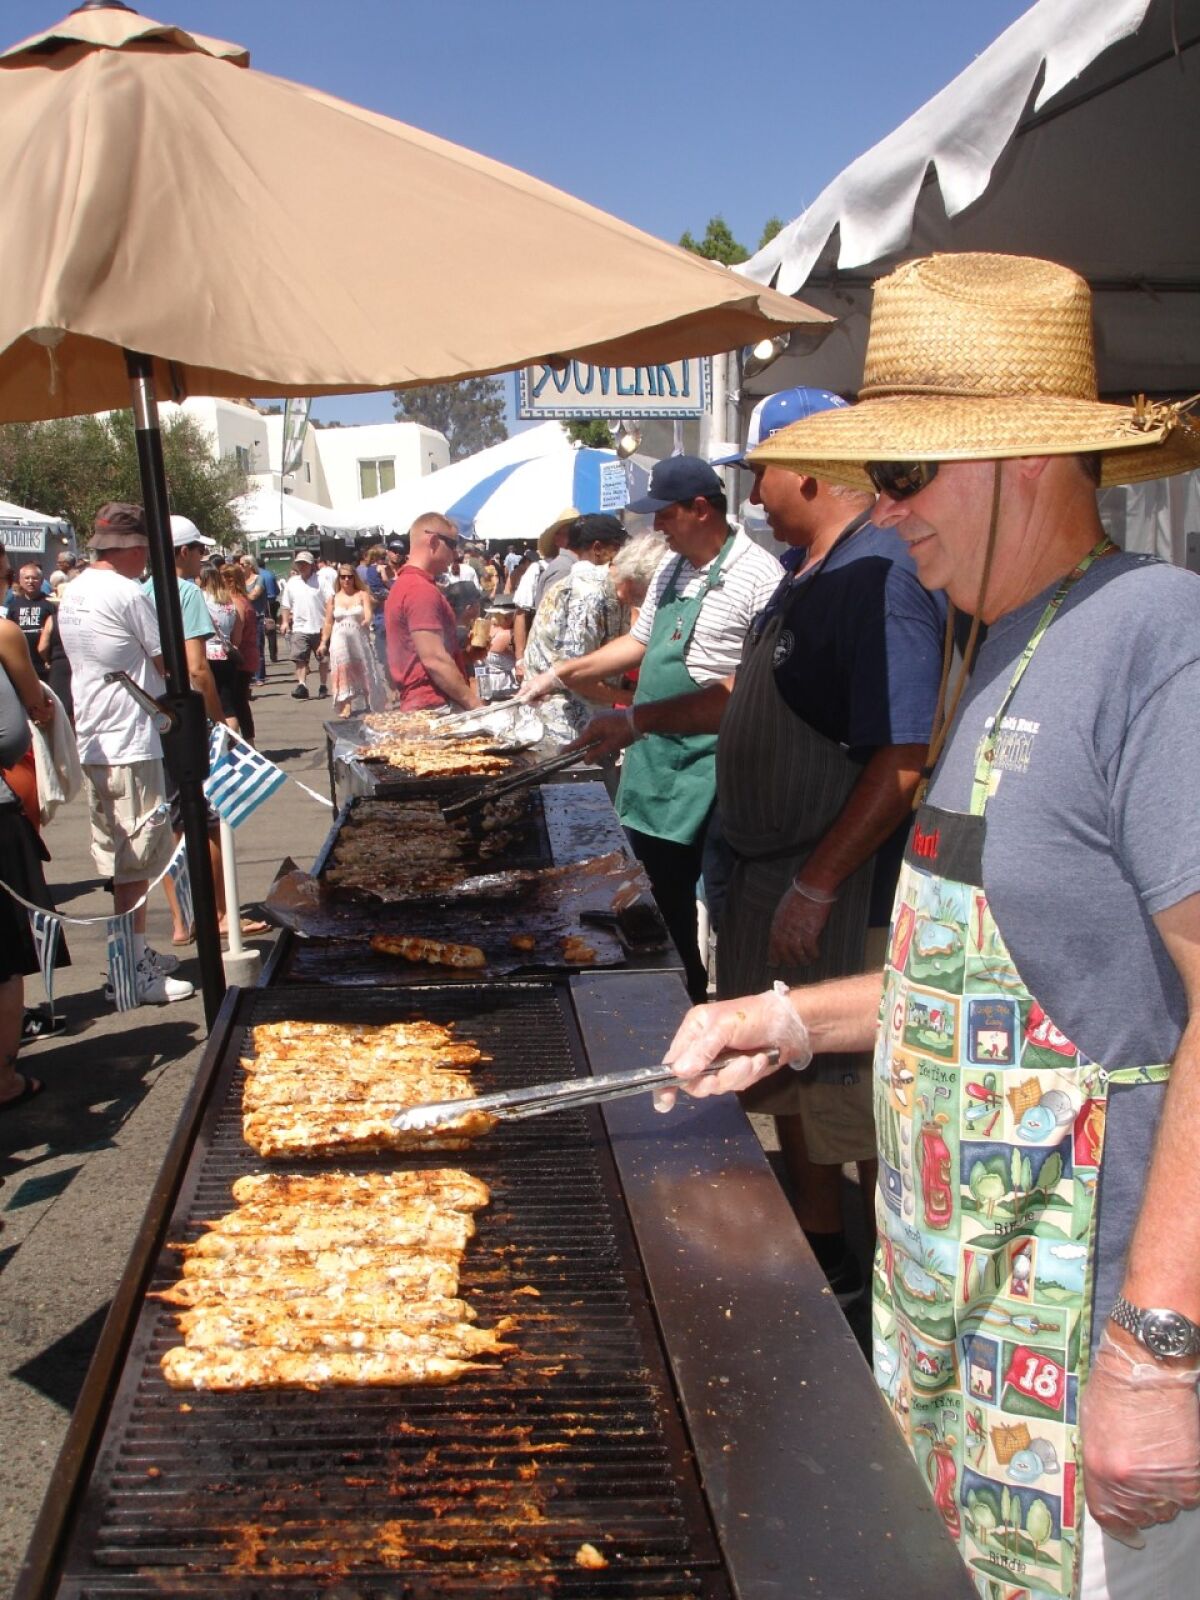 The 41st Annual Cardiff Greek Festival on Sept. 7 and 8 will feature a wide variety of delicious food.